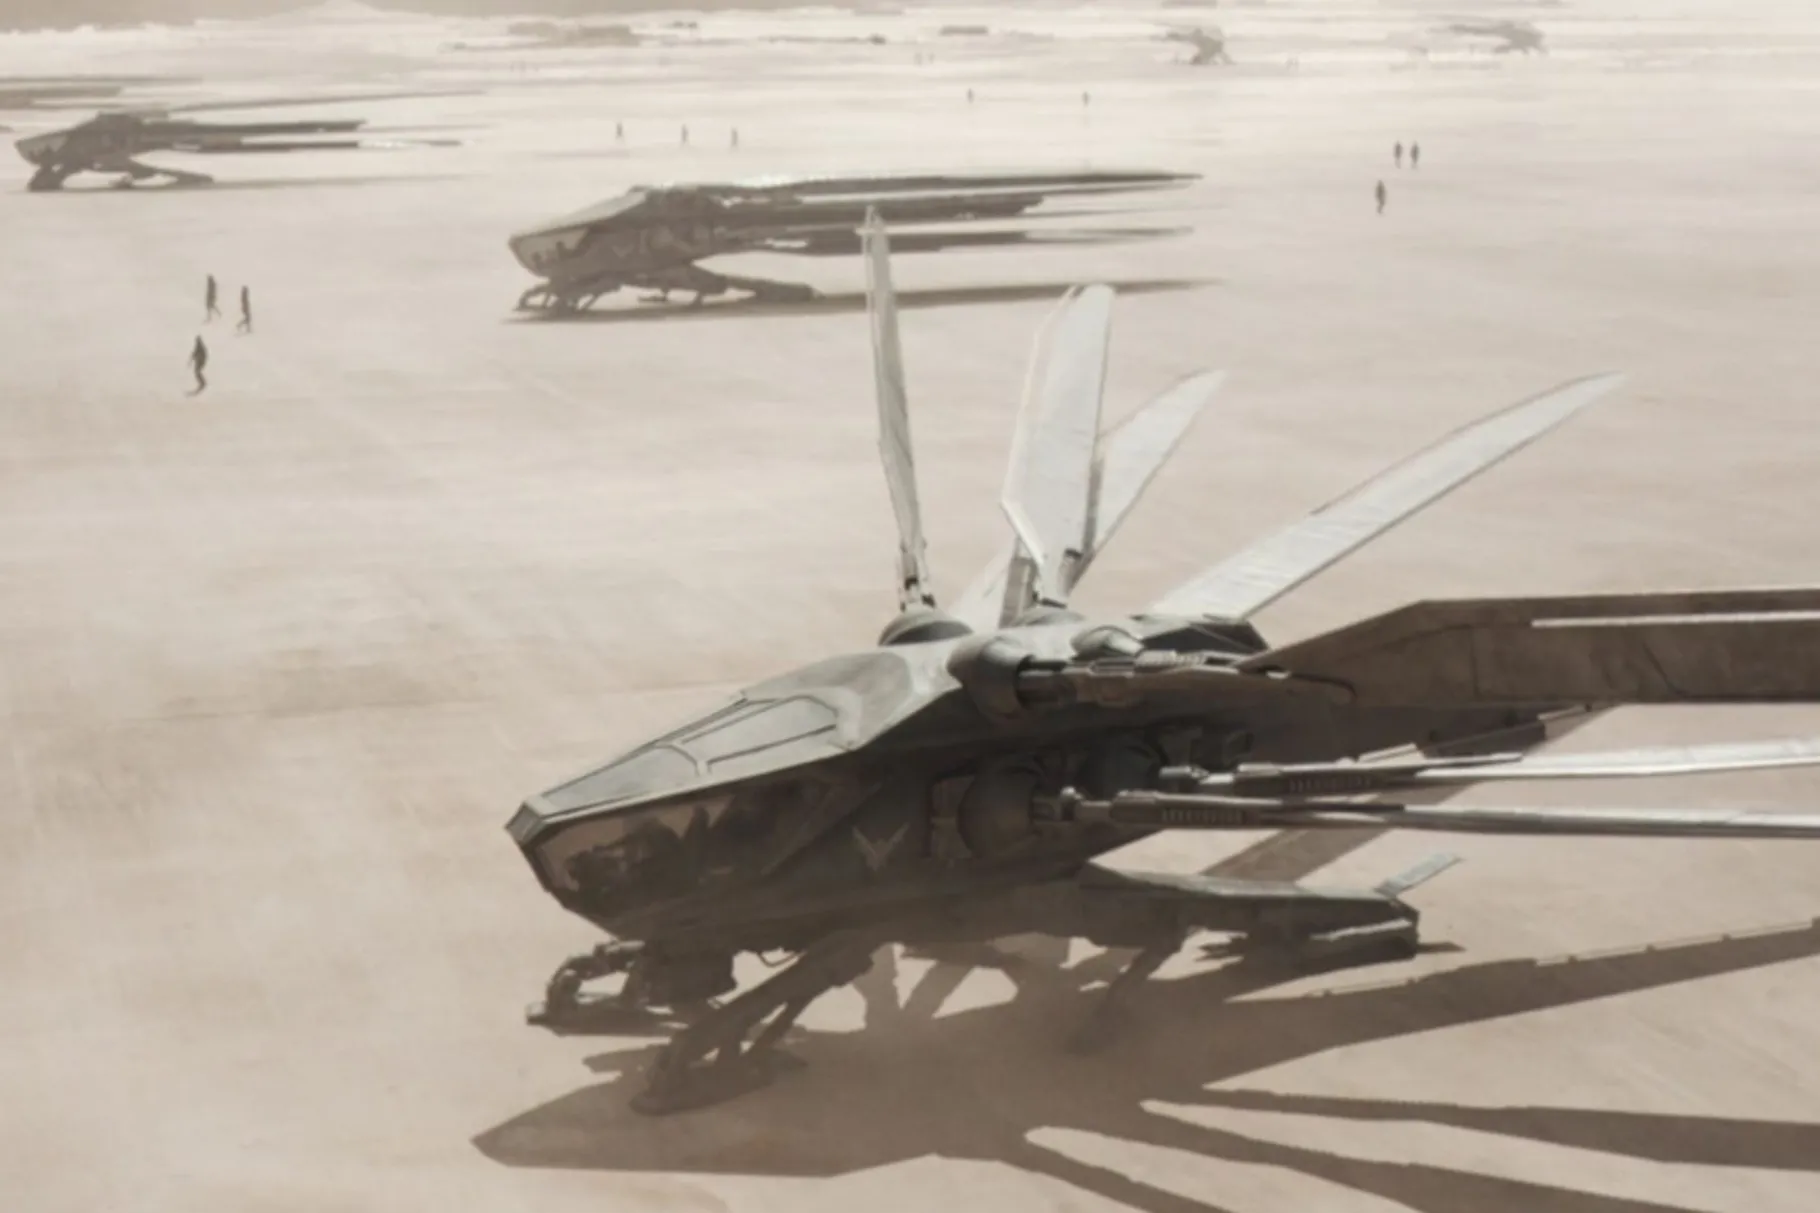 The best part of Dune is the enveloping boom of the thopters